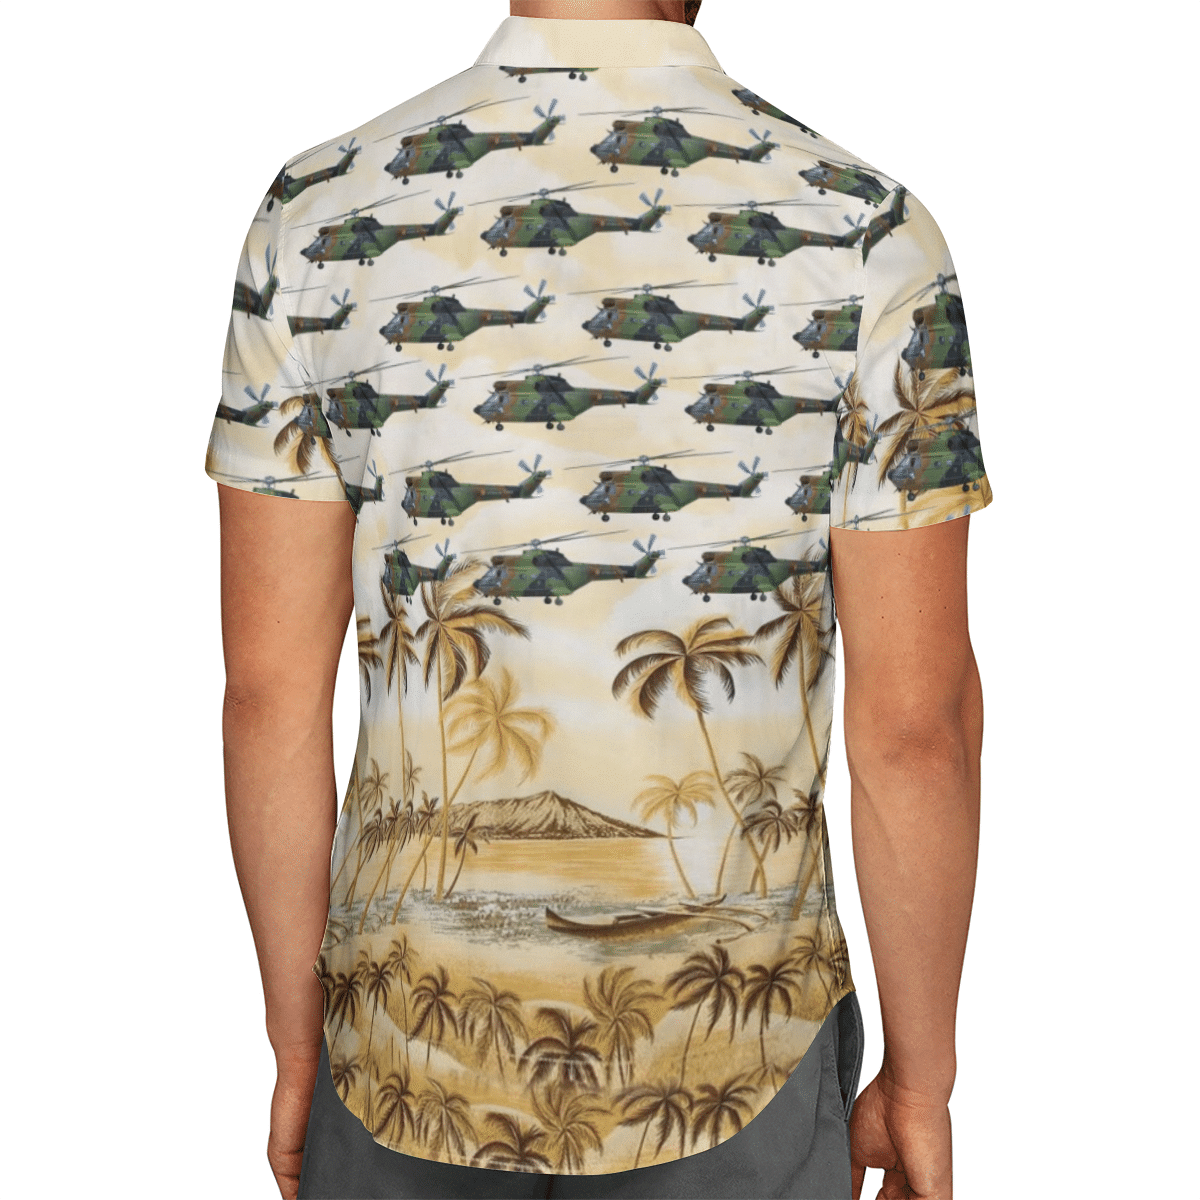 Going to the beach with a quality shirt 185